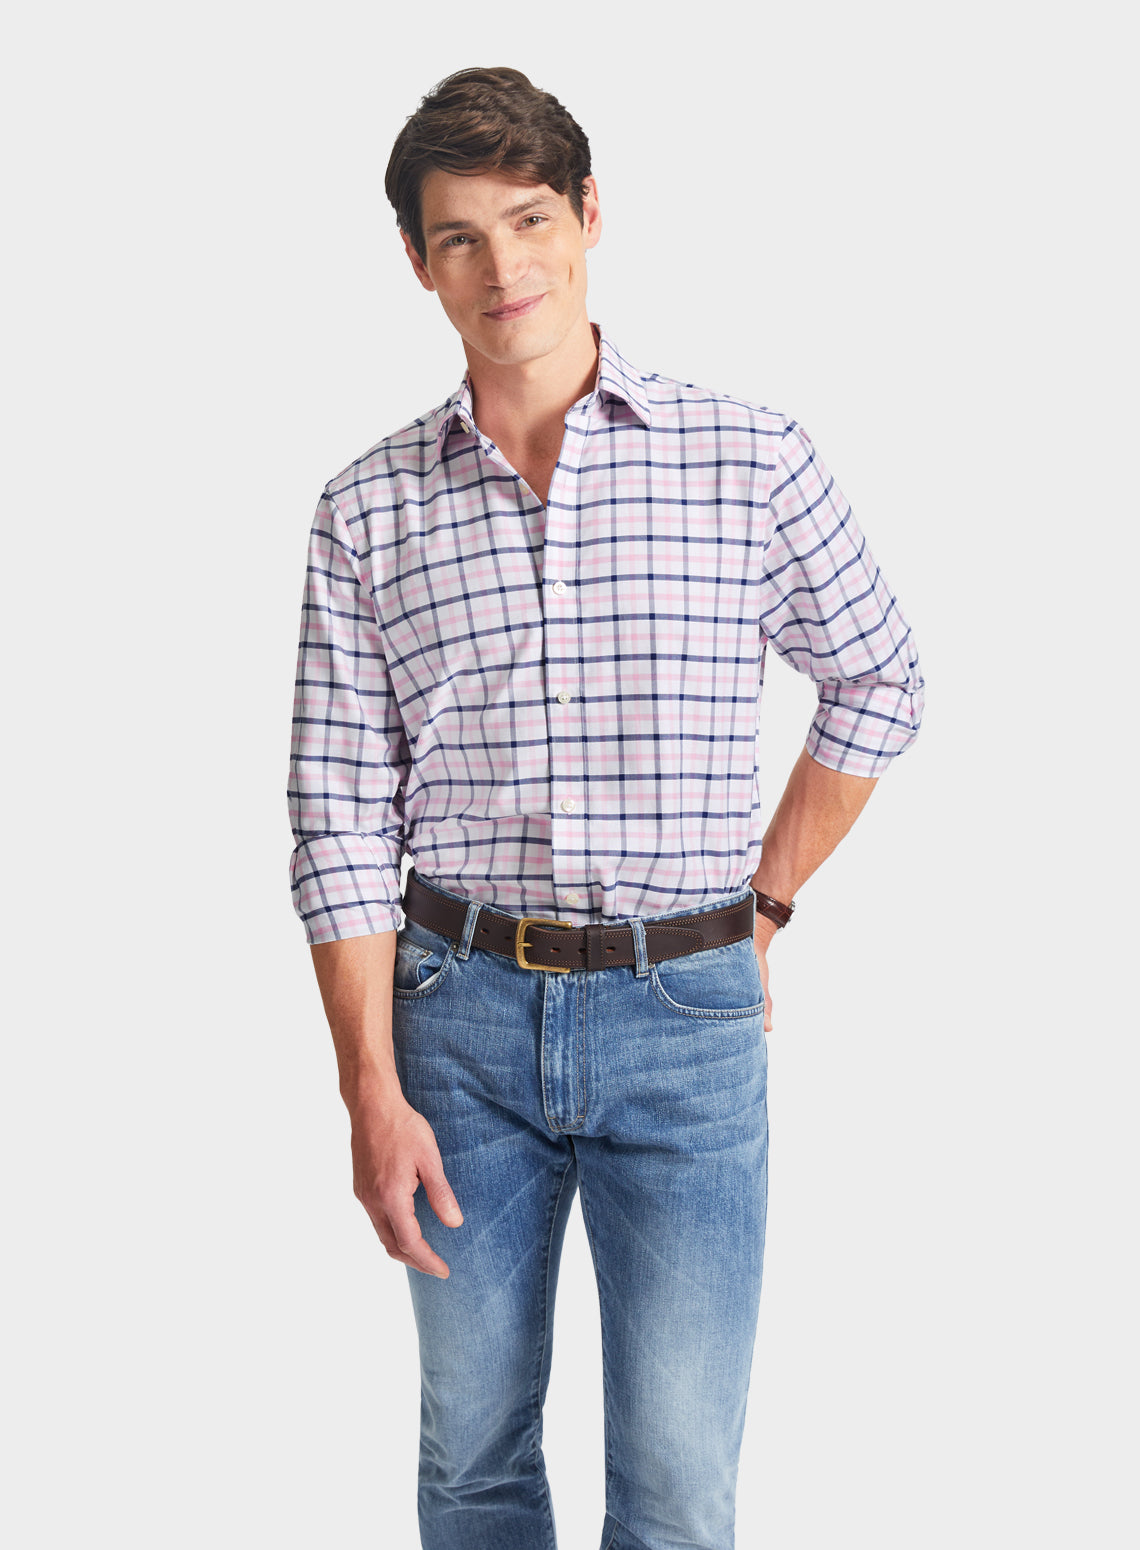 Classic Shirt in Navy and Pink Check